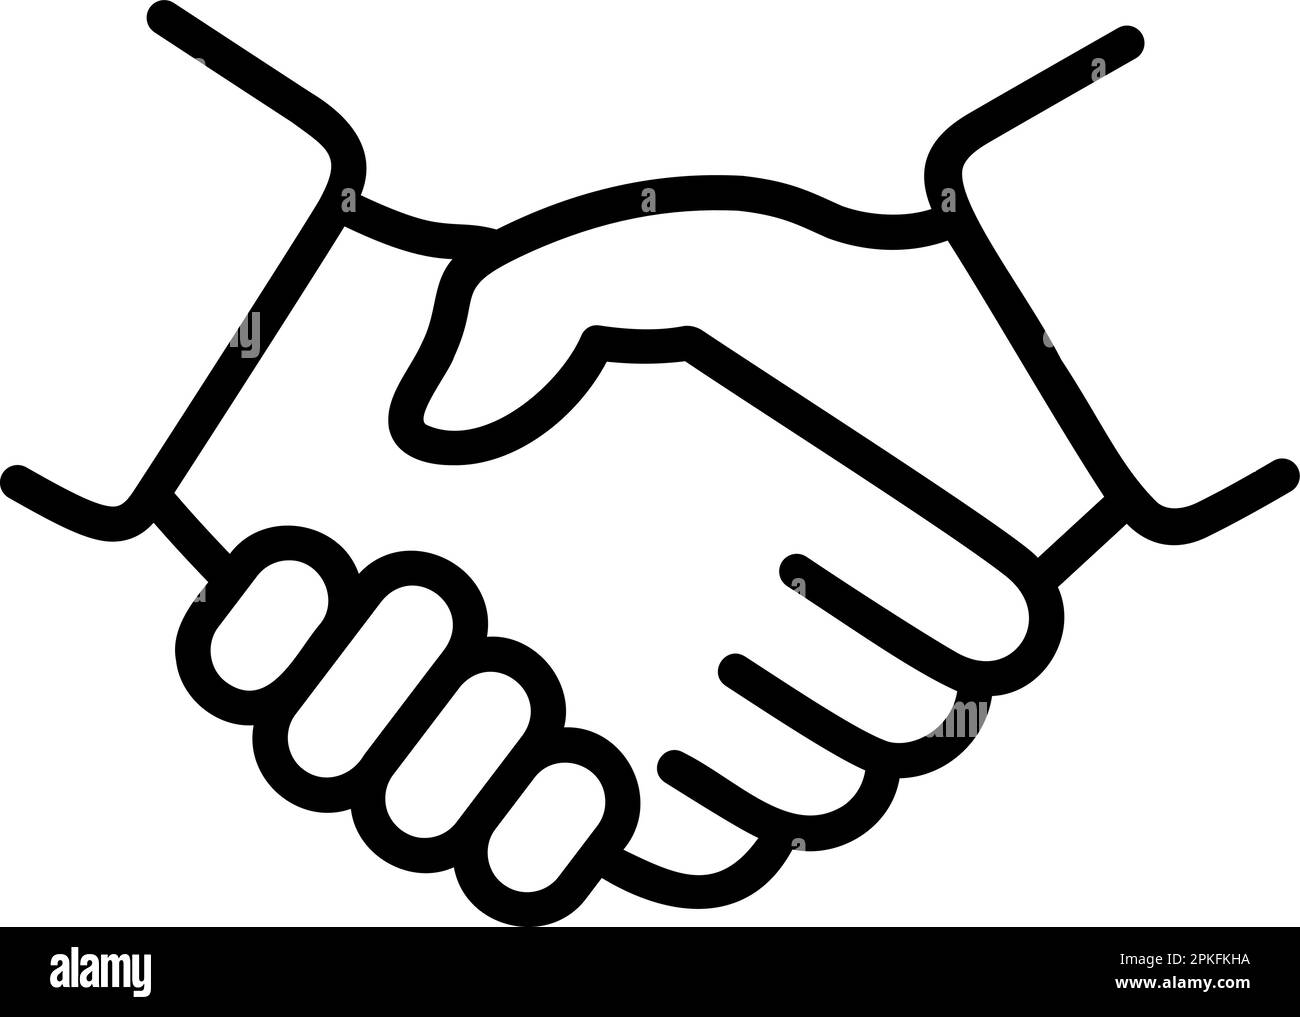 Linear vector icon of handshake of two hands as concept of trust, commitment and partnership Stock Vector